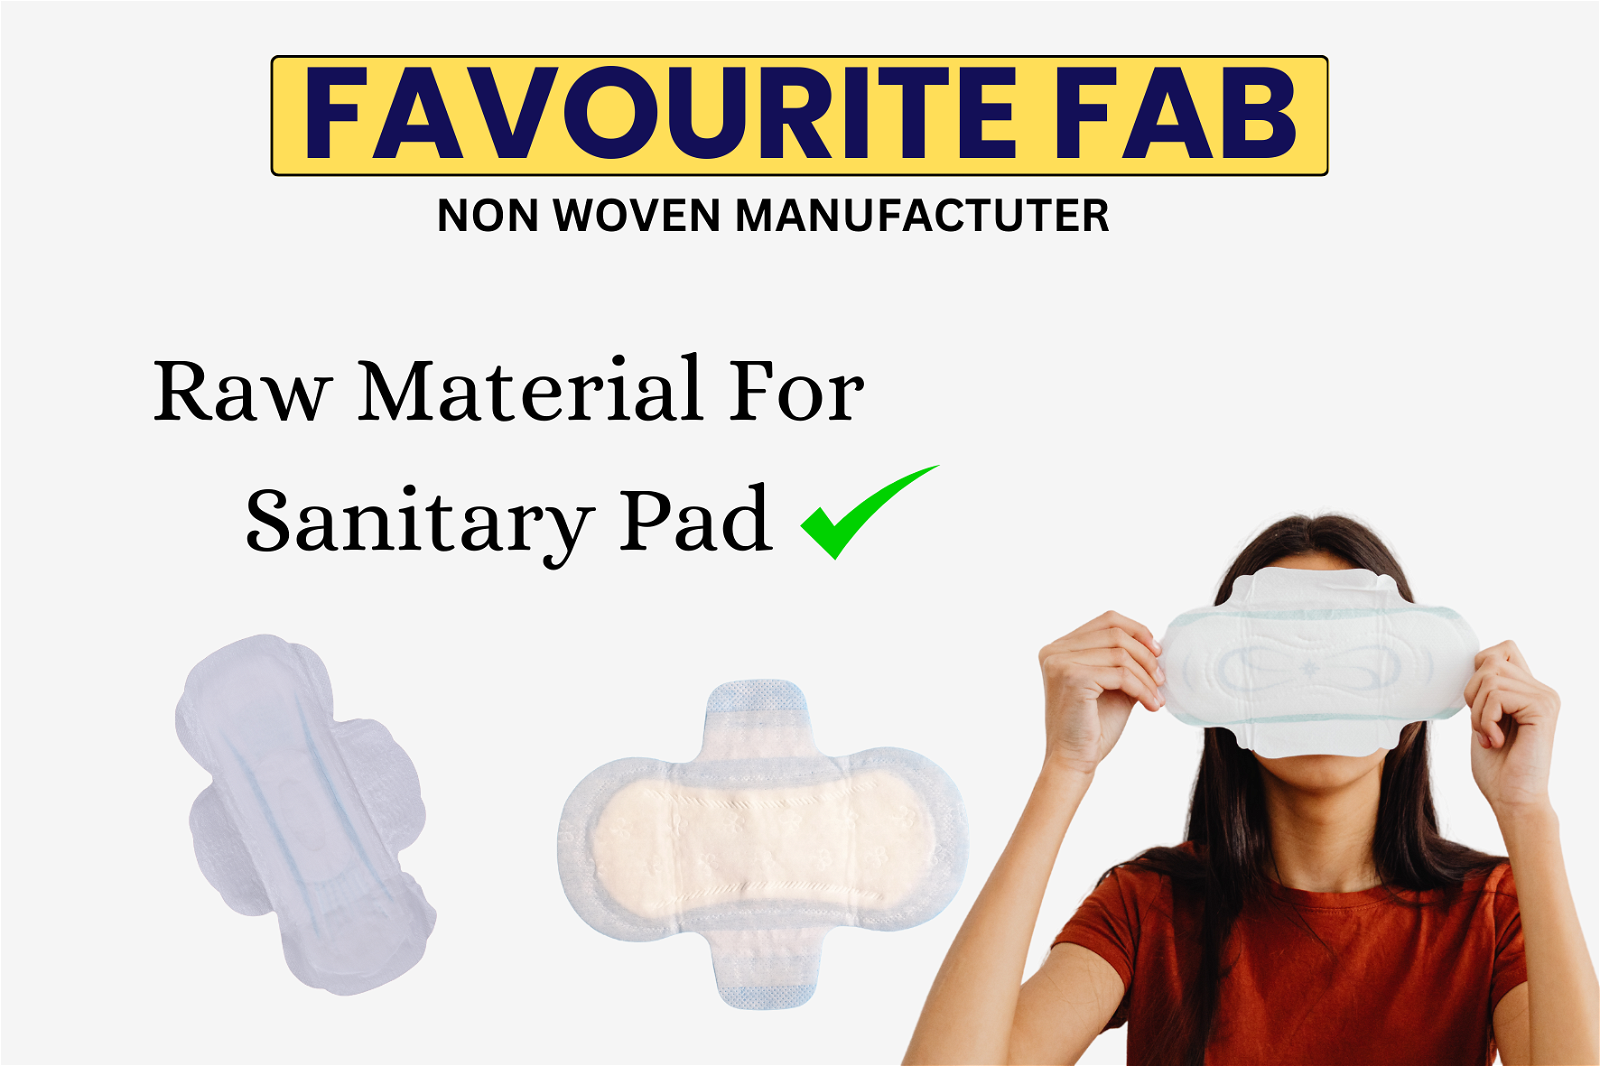 Buy Best Sanitary Pads Without Disposal Bags Online in India 2023